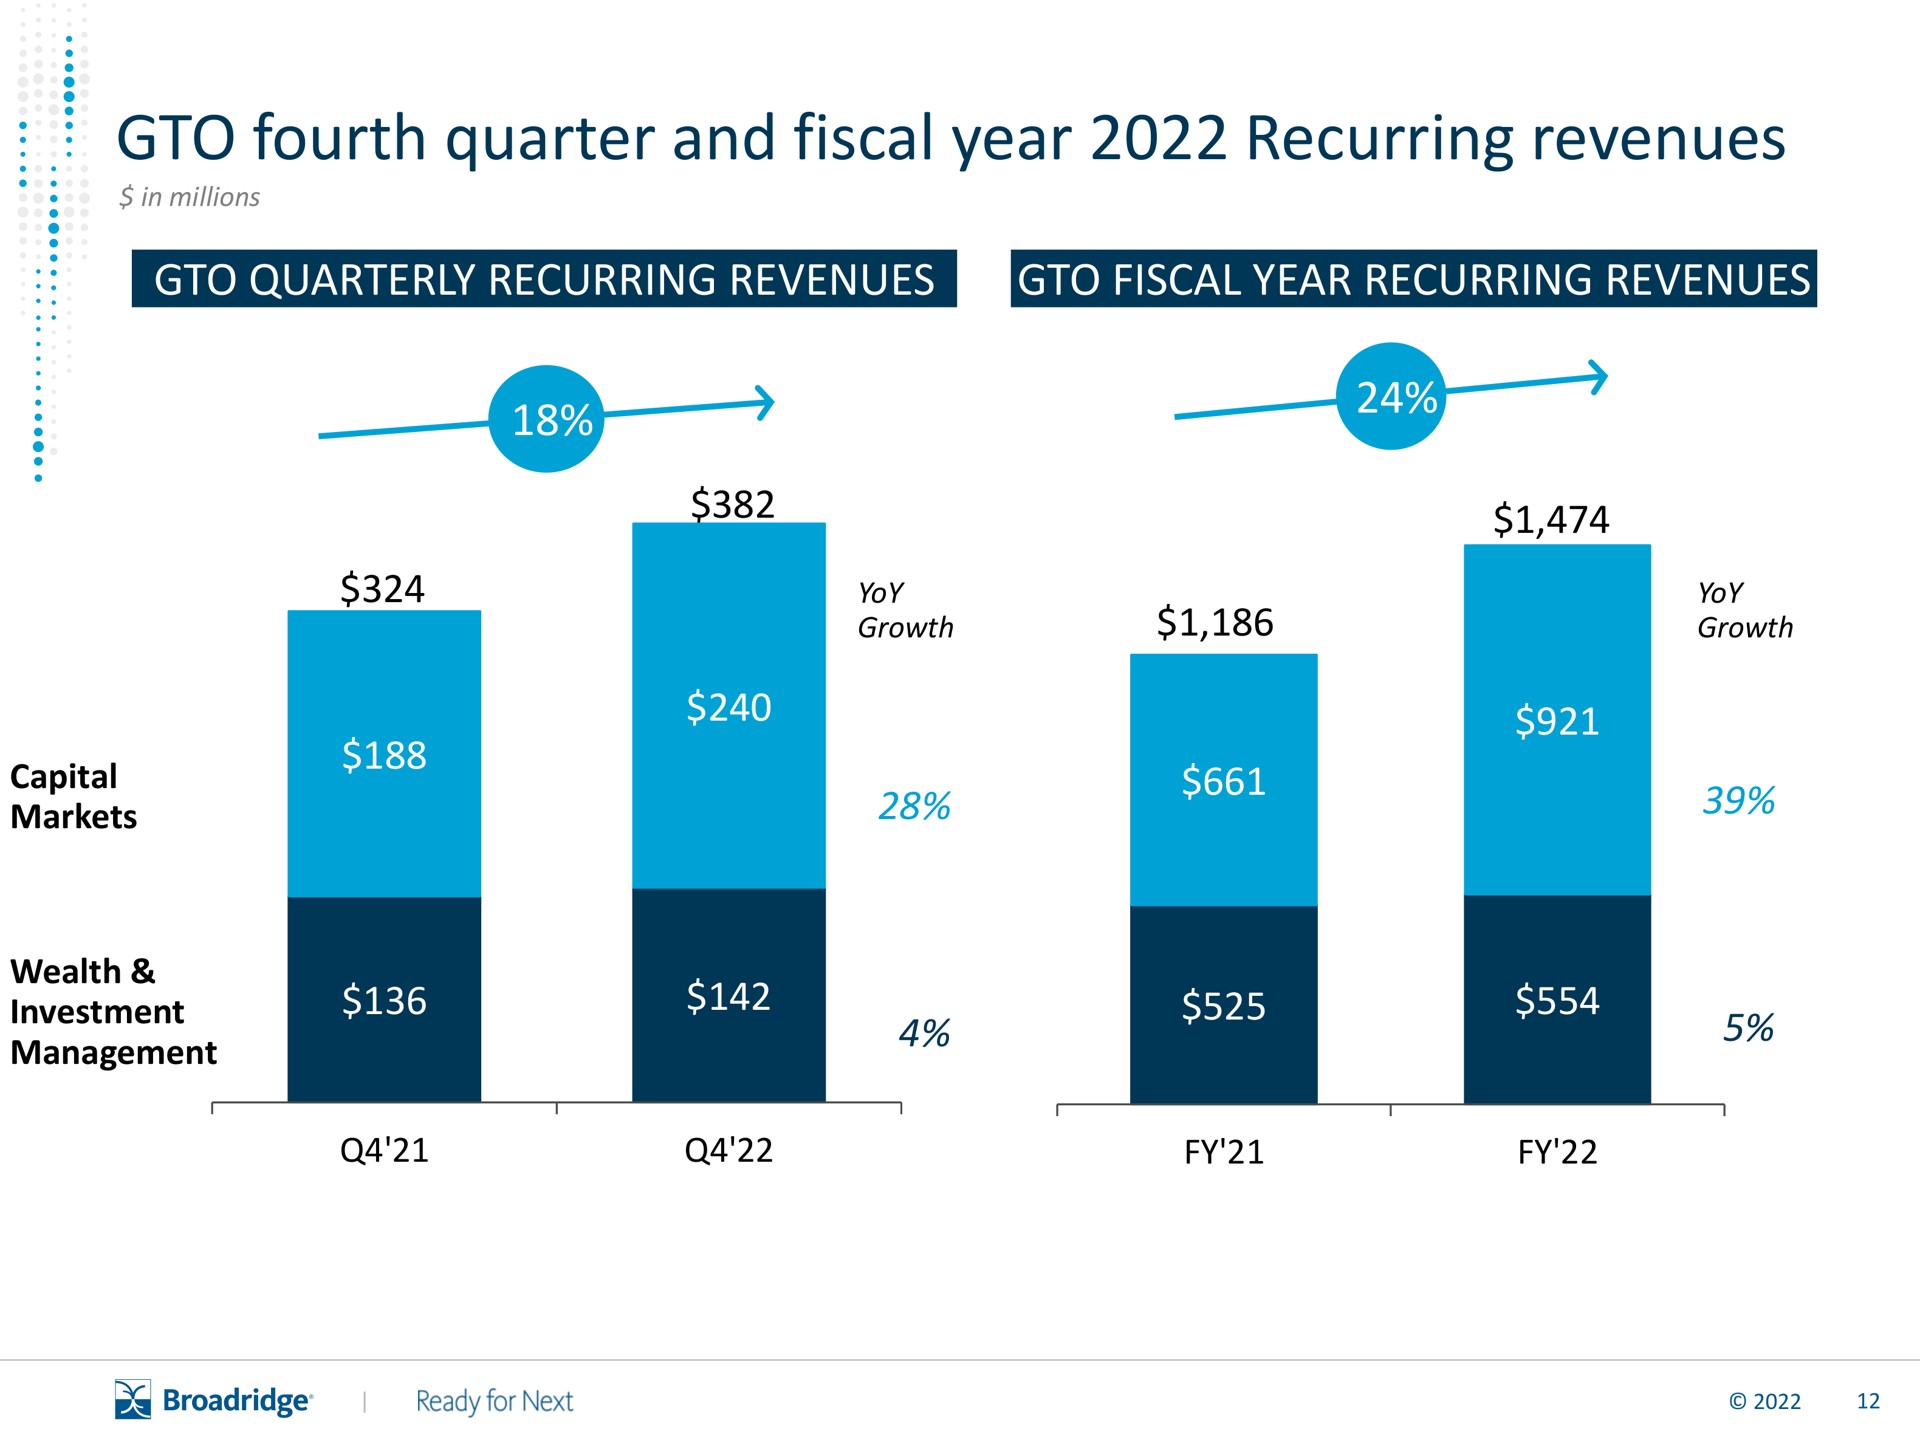 fourth quarter and fiscal year recurring revenues | Broadridge Financial Solutions